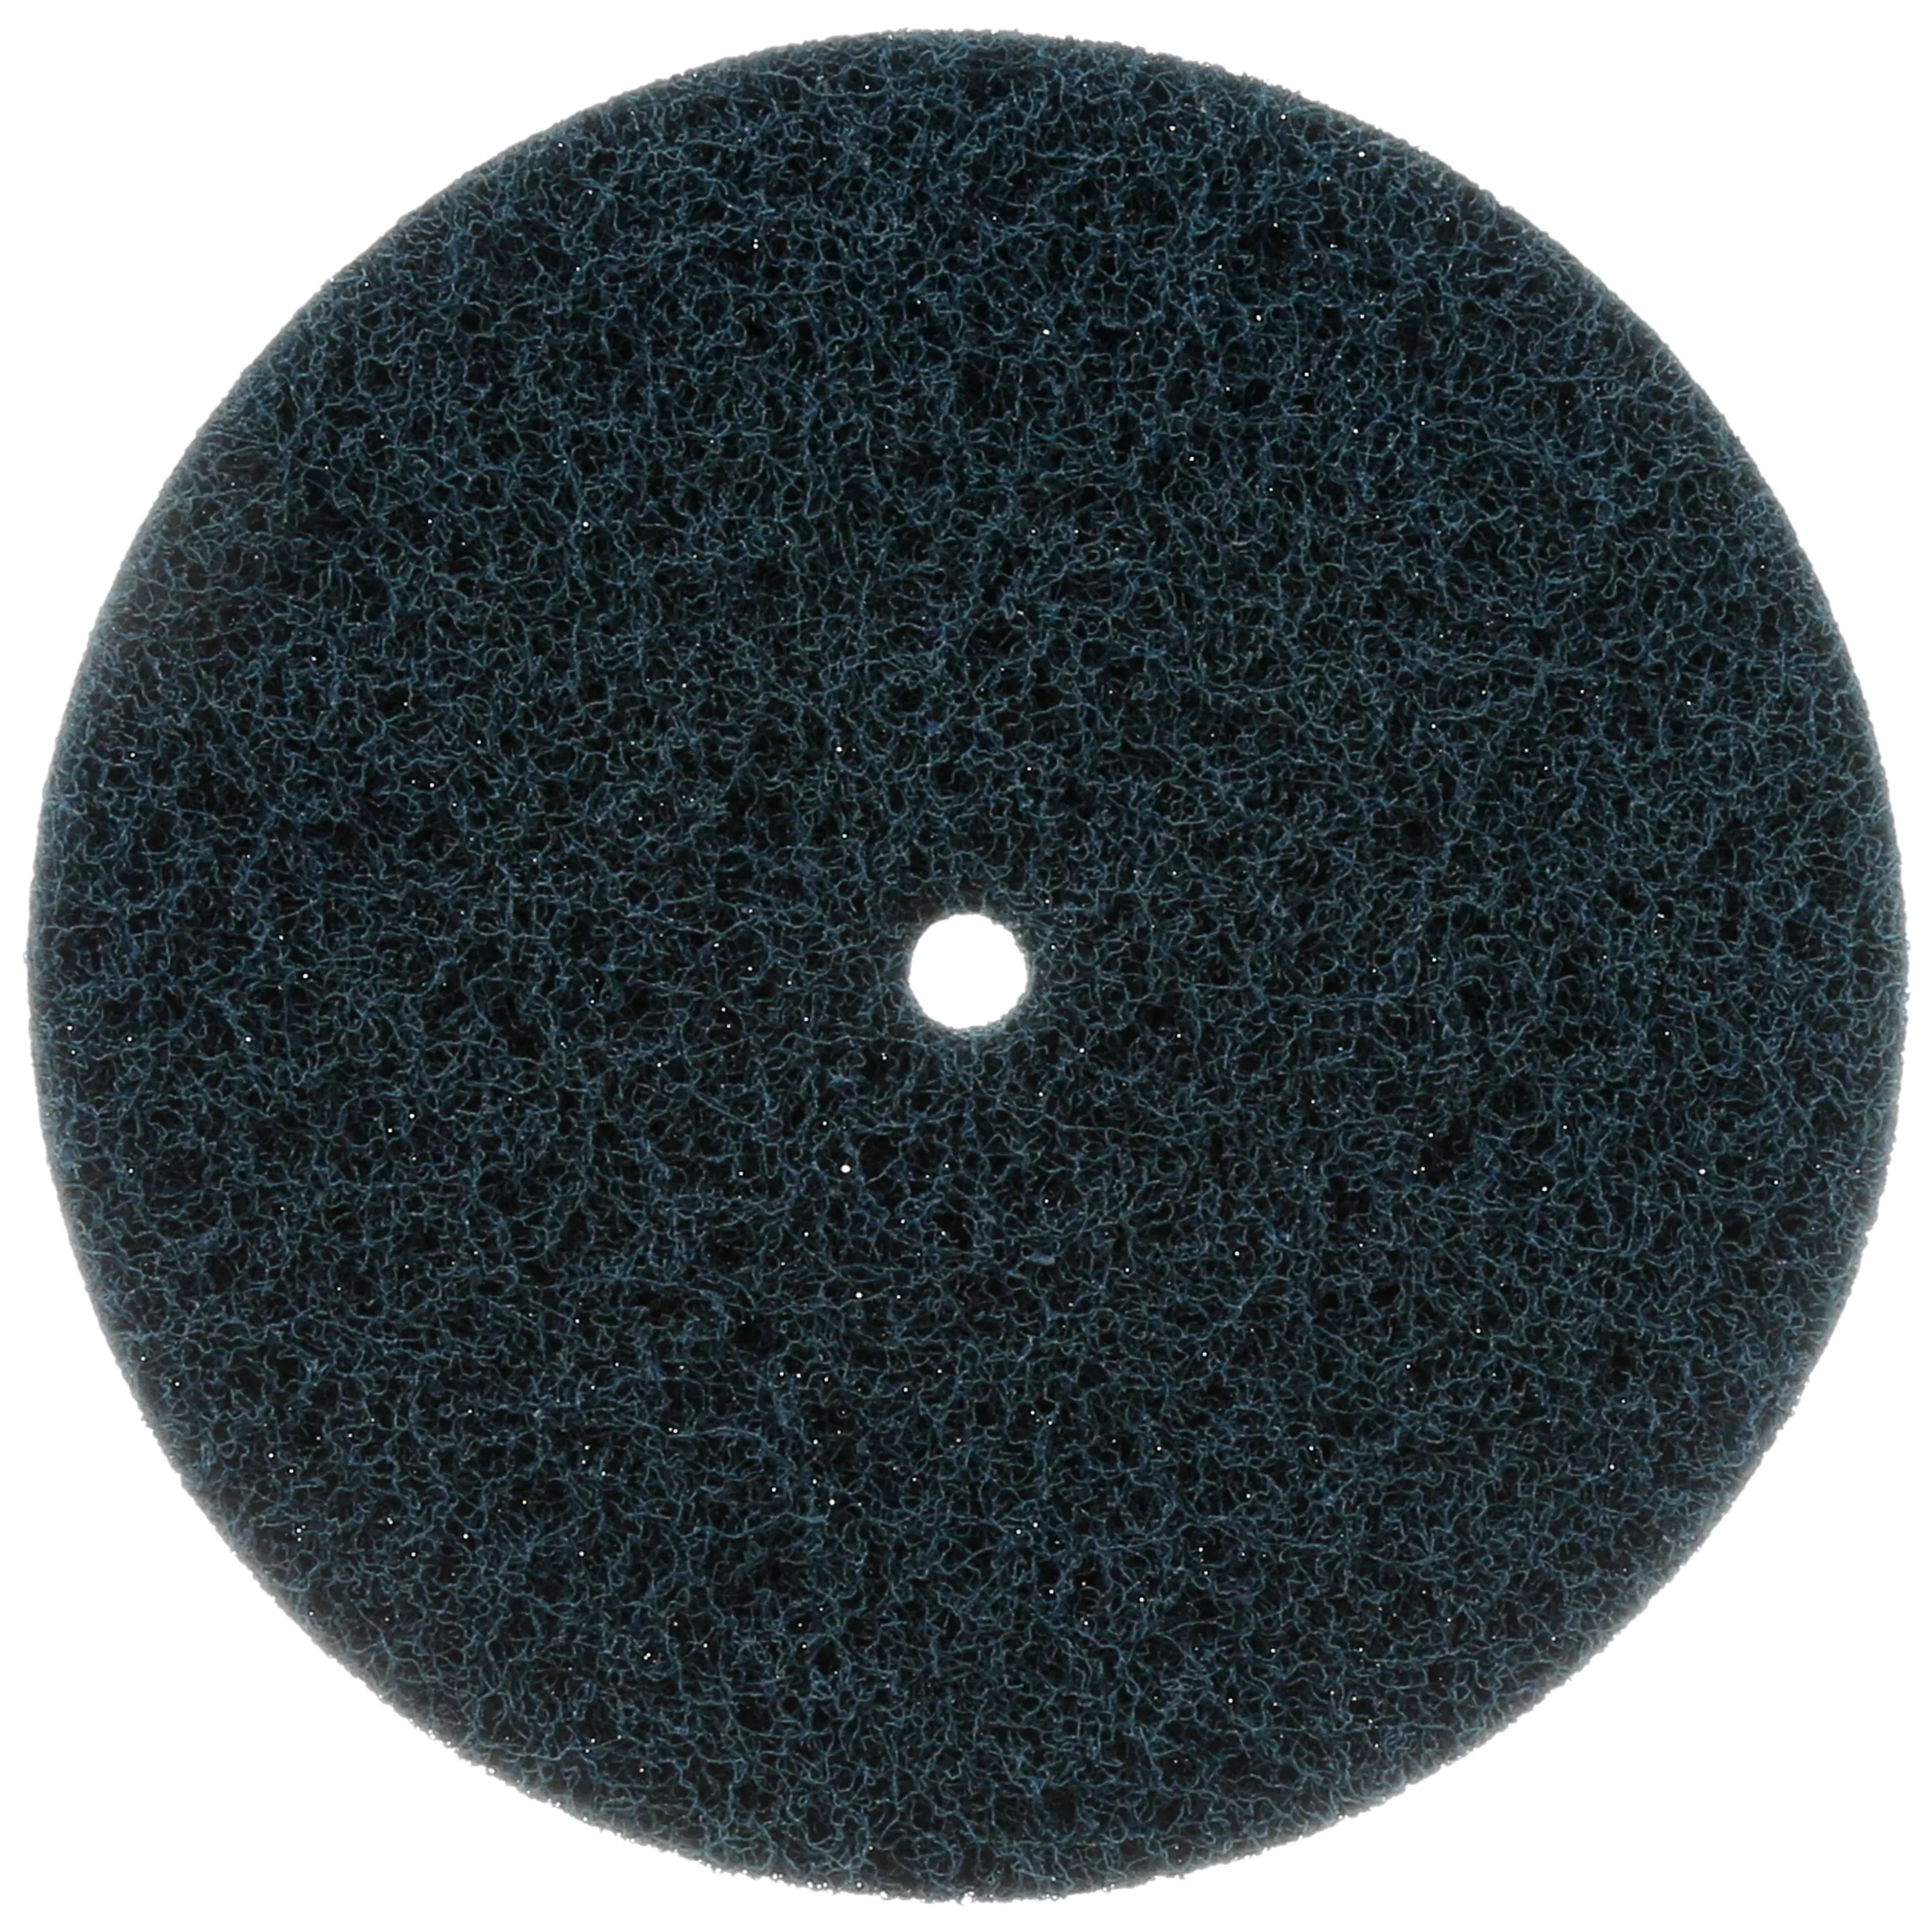 Standard Abrasives™ Buff and Blend HS Disc, 810910, 8 in x 1/2 in A MED,
10/Pac, 100 ea/Case